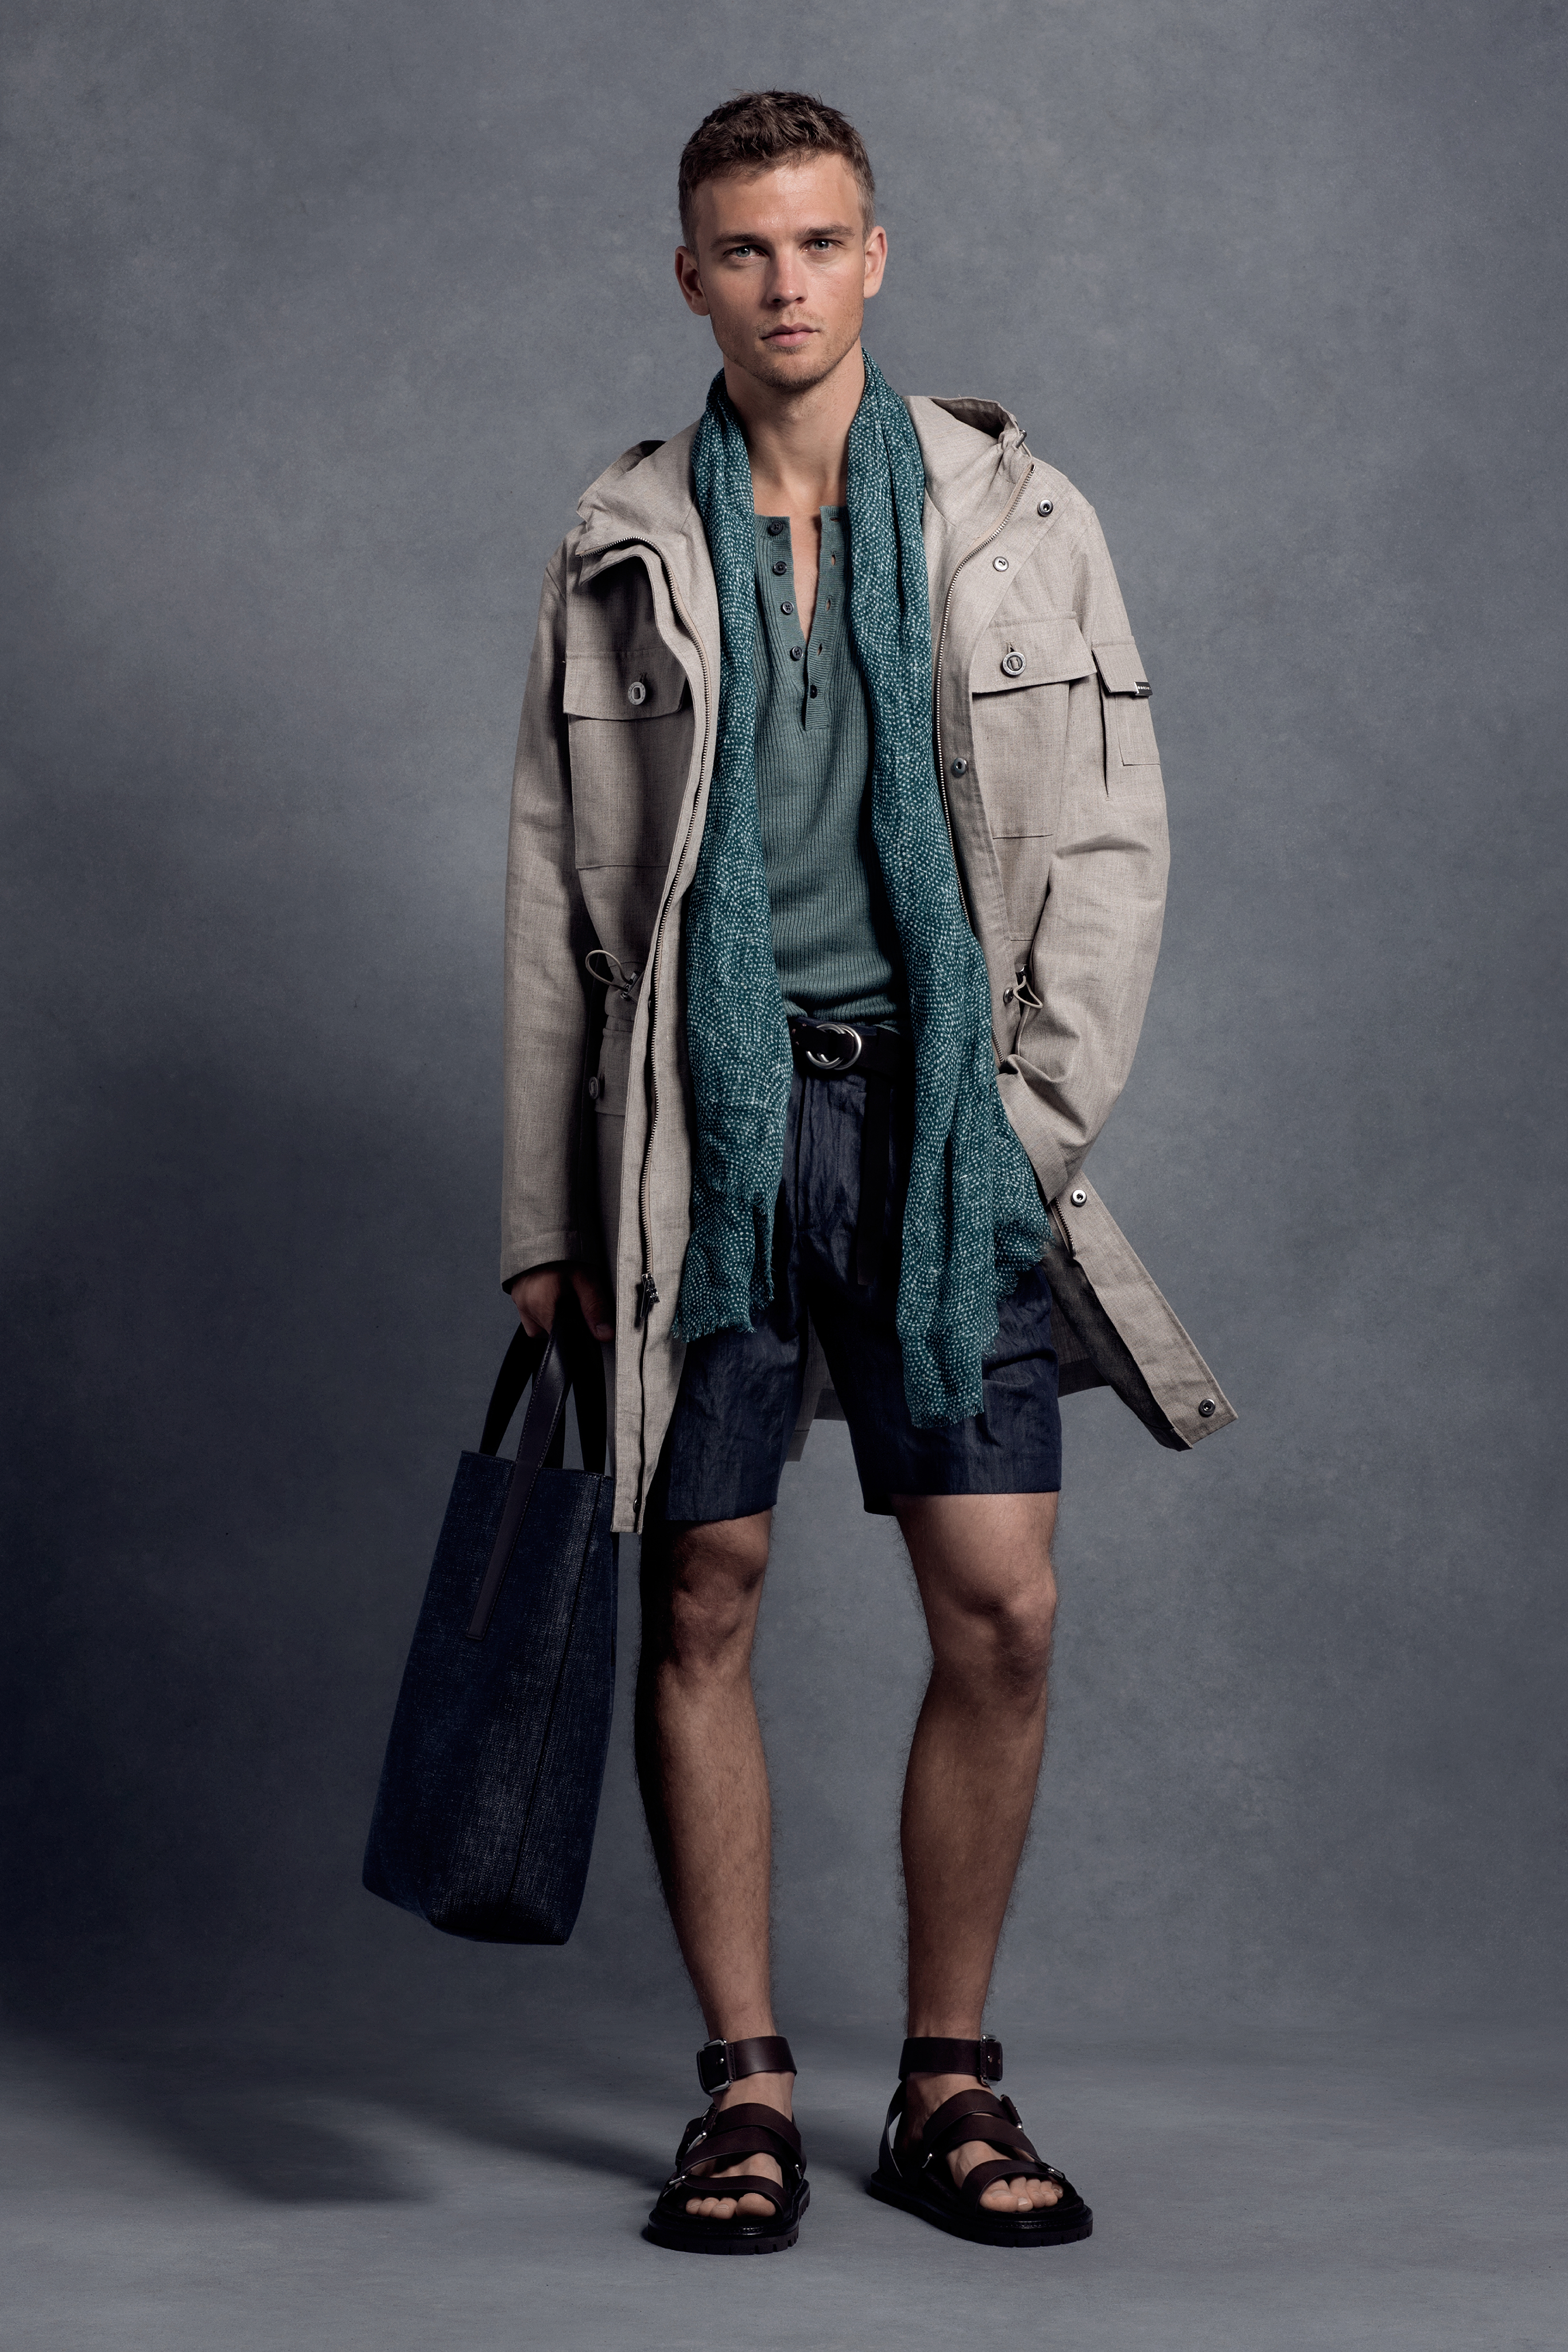 Michael Kors Spring 2016 Men's Collection - Daily Front Row